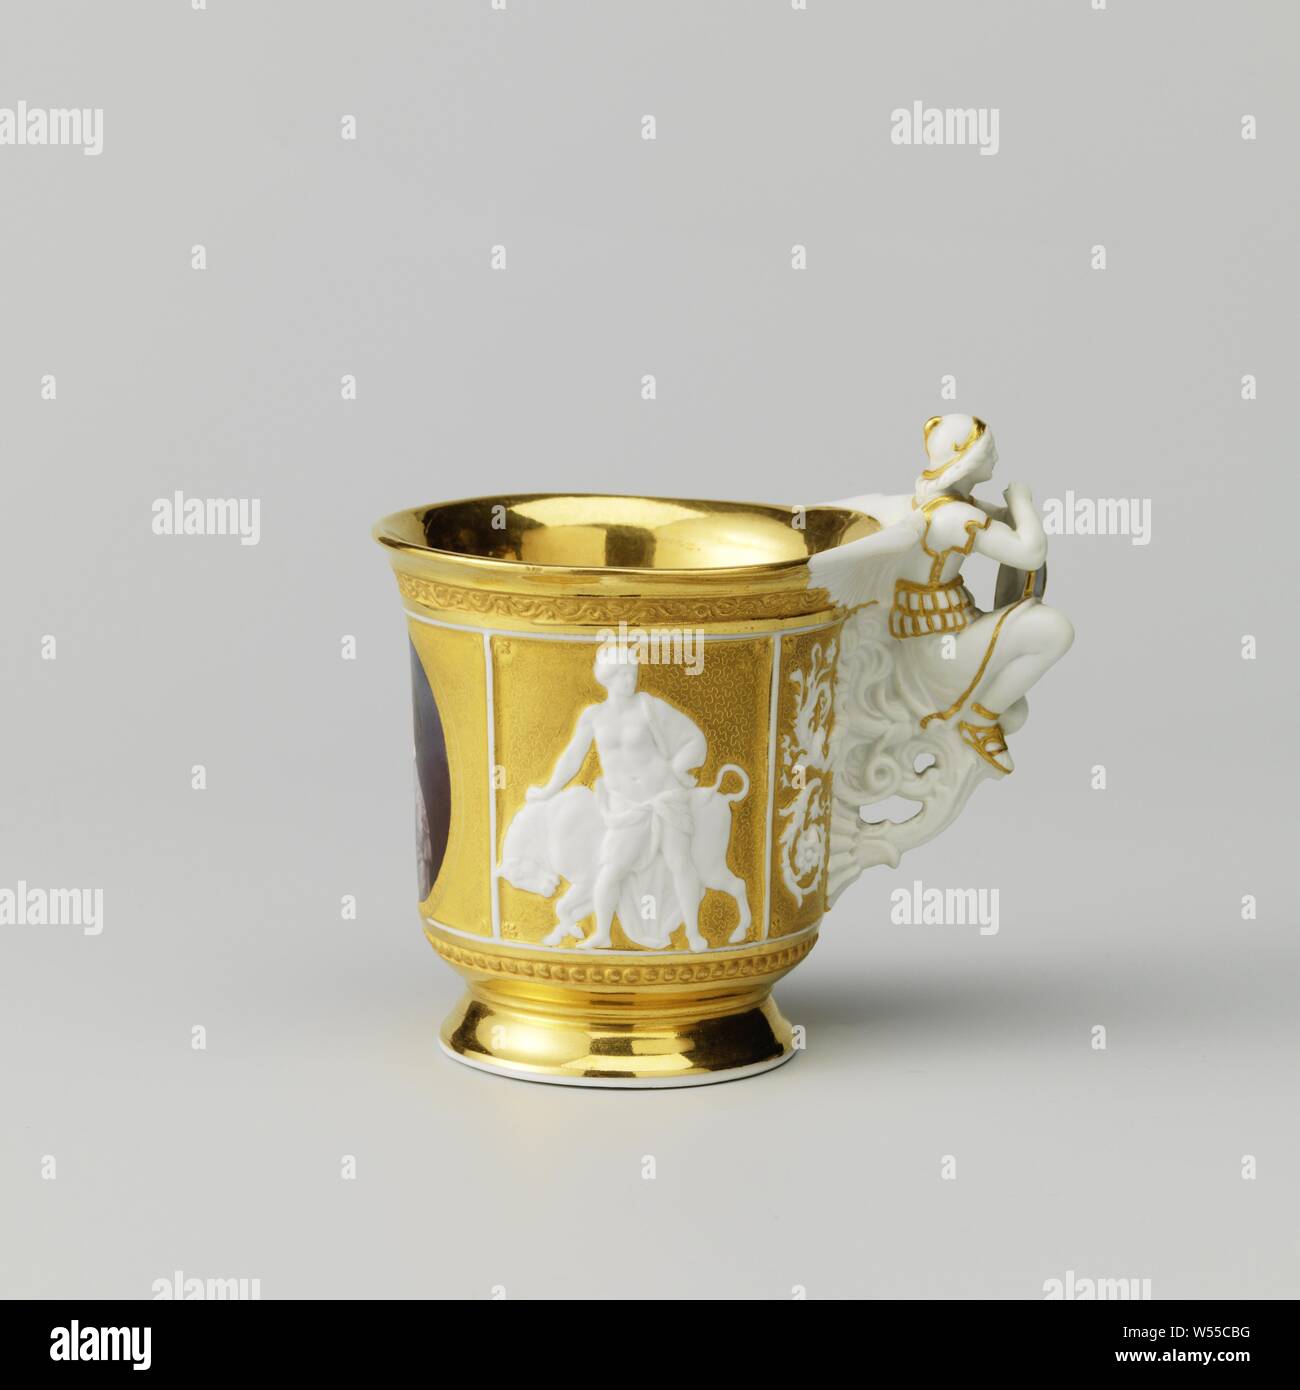 Cup with the portrait of Maria van Hohenzollern-Sigmaringen, Cup of porcelain on foot, painted on the glaze in enamel colors and gold. The outer wall is divided into four compartments with a medallion in one with the portrait of Maria van Hohenzollern-Sigmaringen, signed 'A. Ambronn '. A classical representation on both sides of this in relief: Hercules with the lion and Europe with the bull. The ear is in the shape of a winged, classically dressed person, kneeling on curls that end in leaf vines on the head. The figure leans with both arms on a coat of arms with the couple's alliance weapon Stock Photo